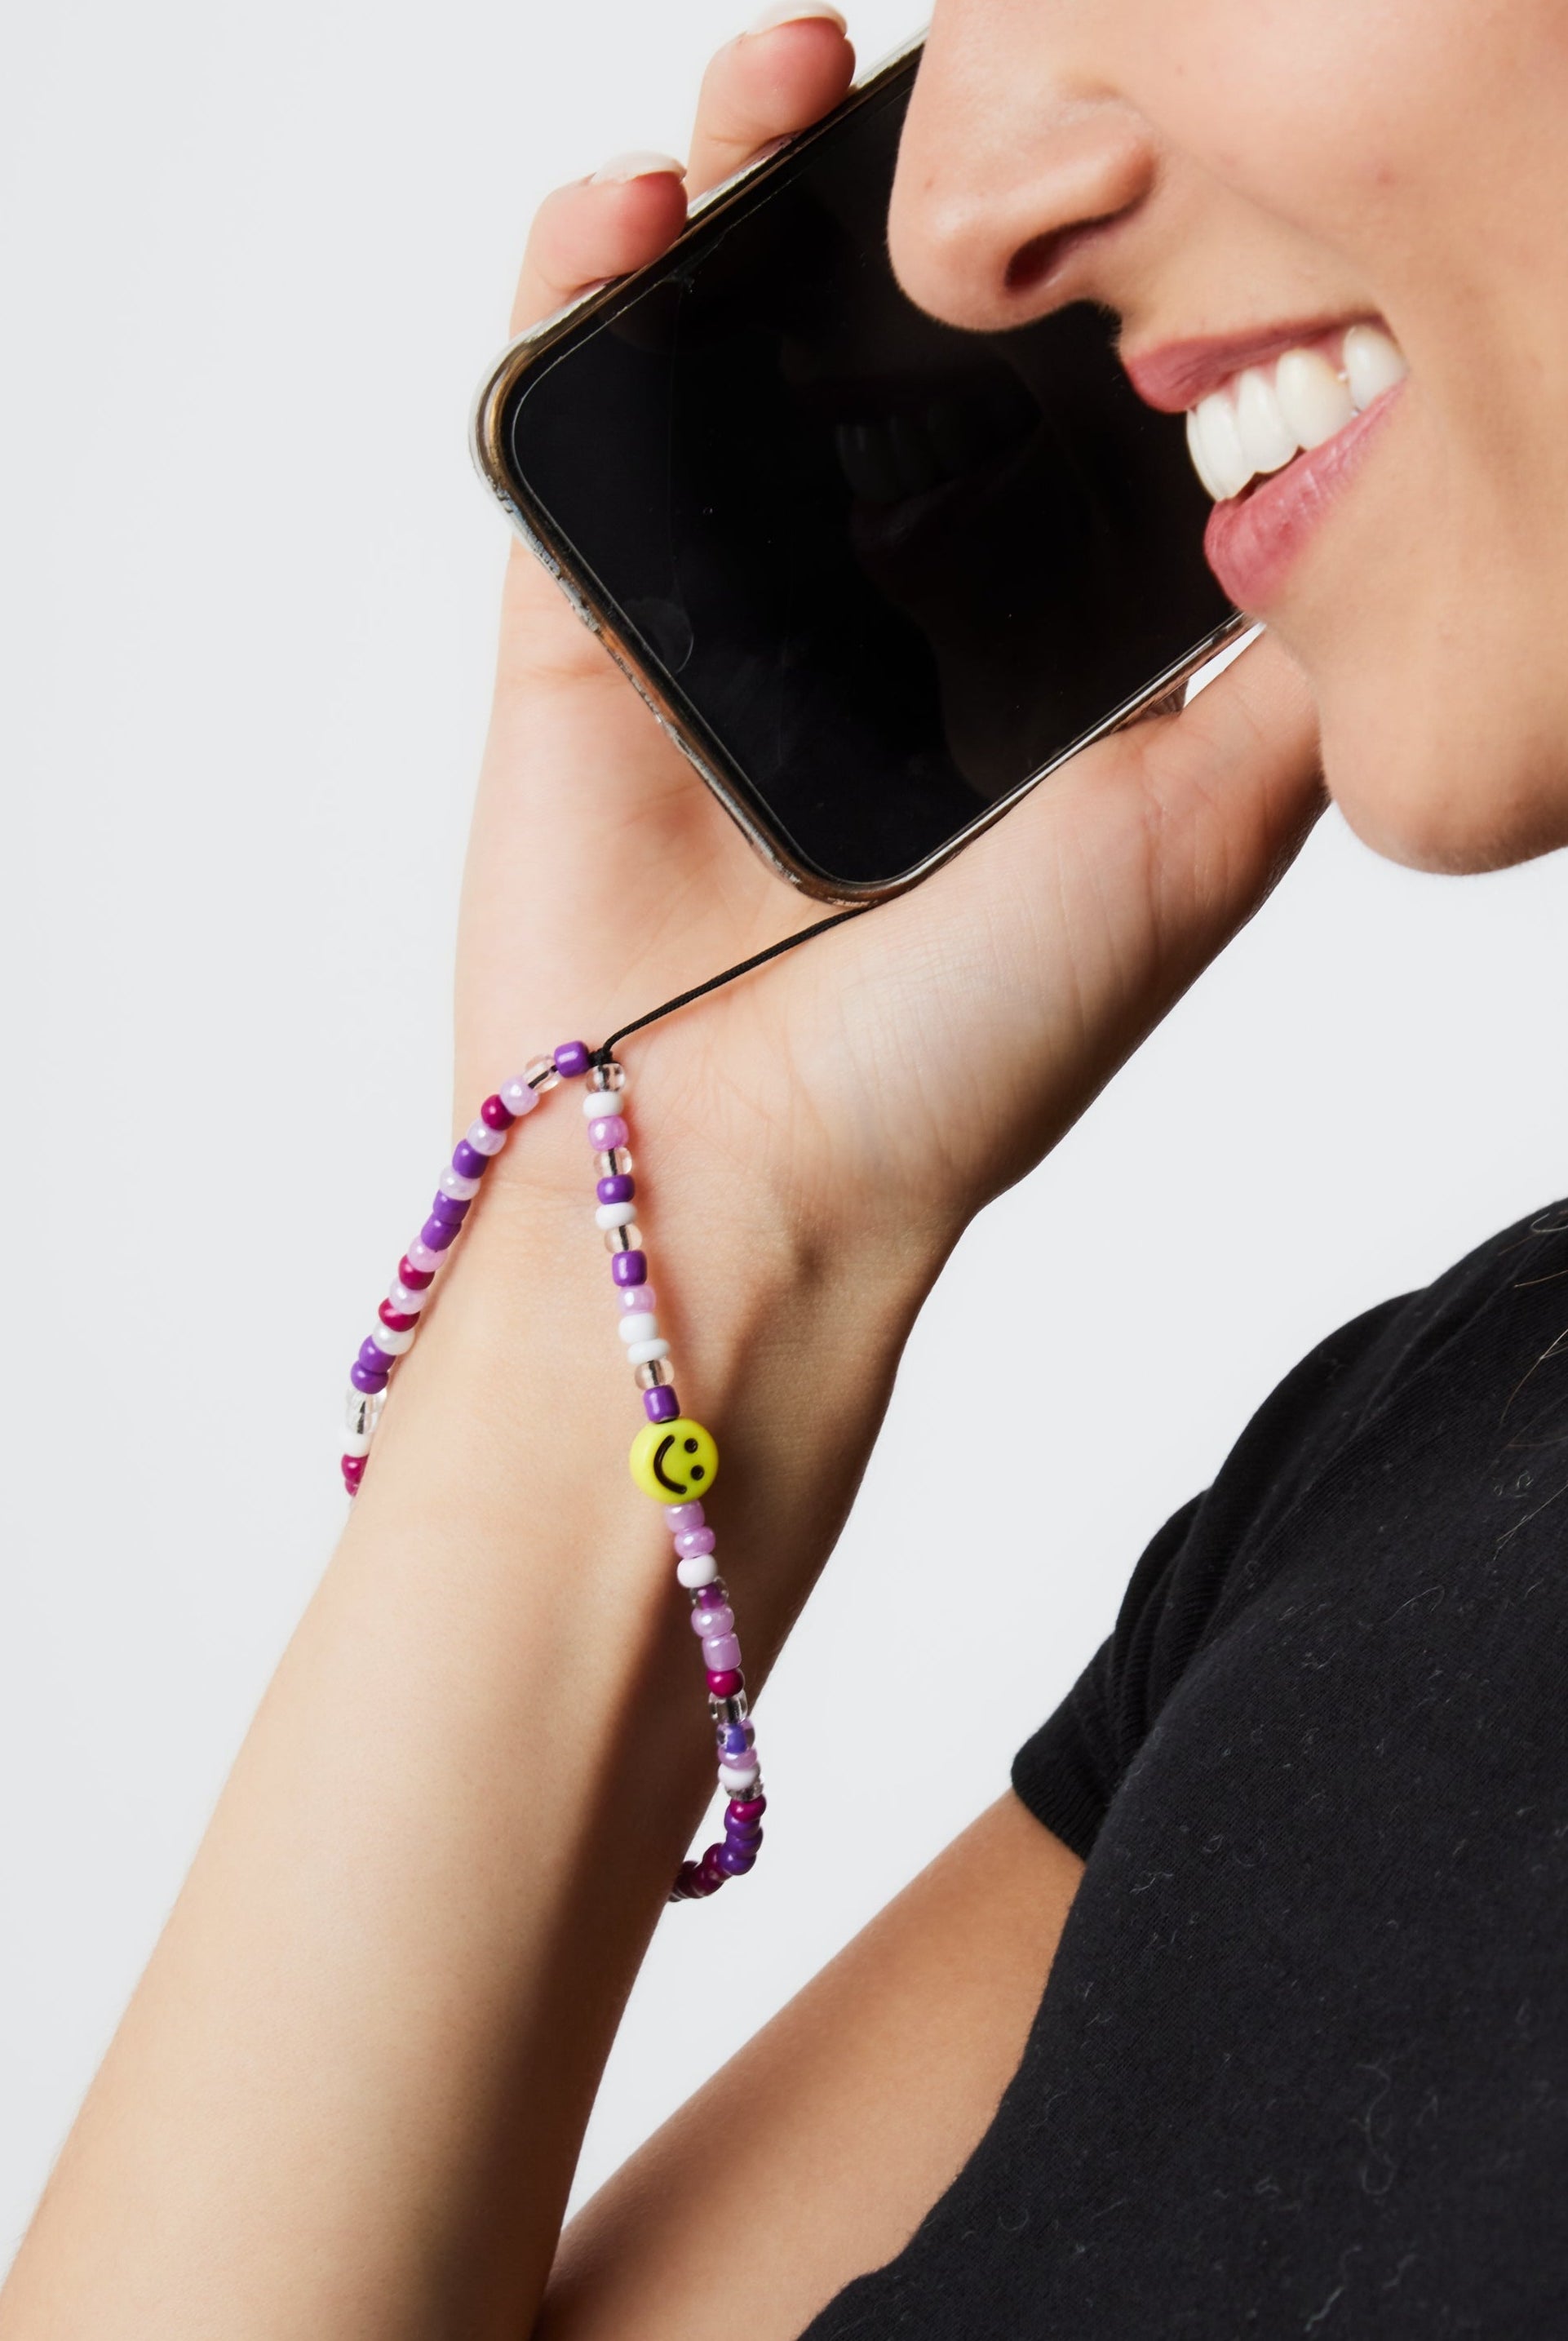 My Accessories London Smiley Phone Charm in Purple | Festival | Beaded | Accessory | Accessories | Present | Christmas | Kidcore | Arty | Fun | Playful | Stocking filler | 